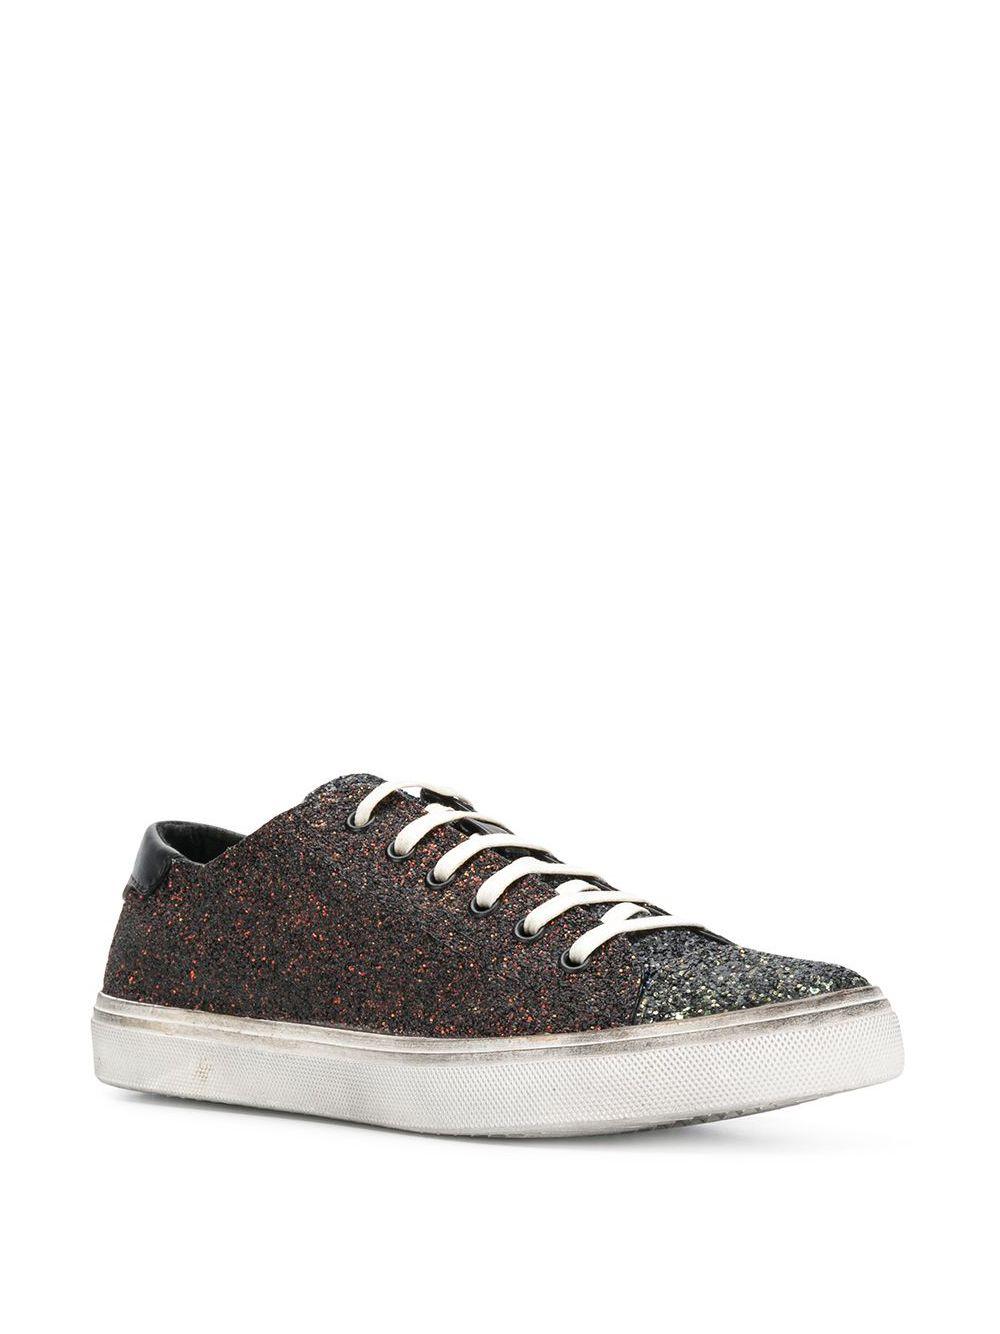 Saint Laurent Distressed Low Top Multicolor Glitter Bedford Sneakers

Founded in 1961 by innovative designer Yves Saint Laurent, French luxury fashion house Saint Laurent fuses expert craftsmanship with the label’s signature rock ‘n’ roll flair.